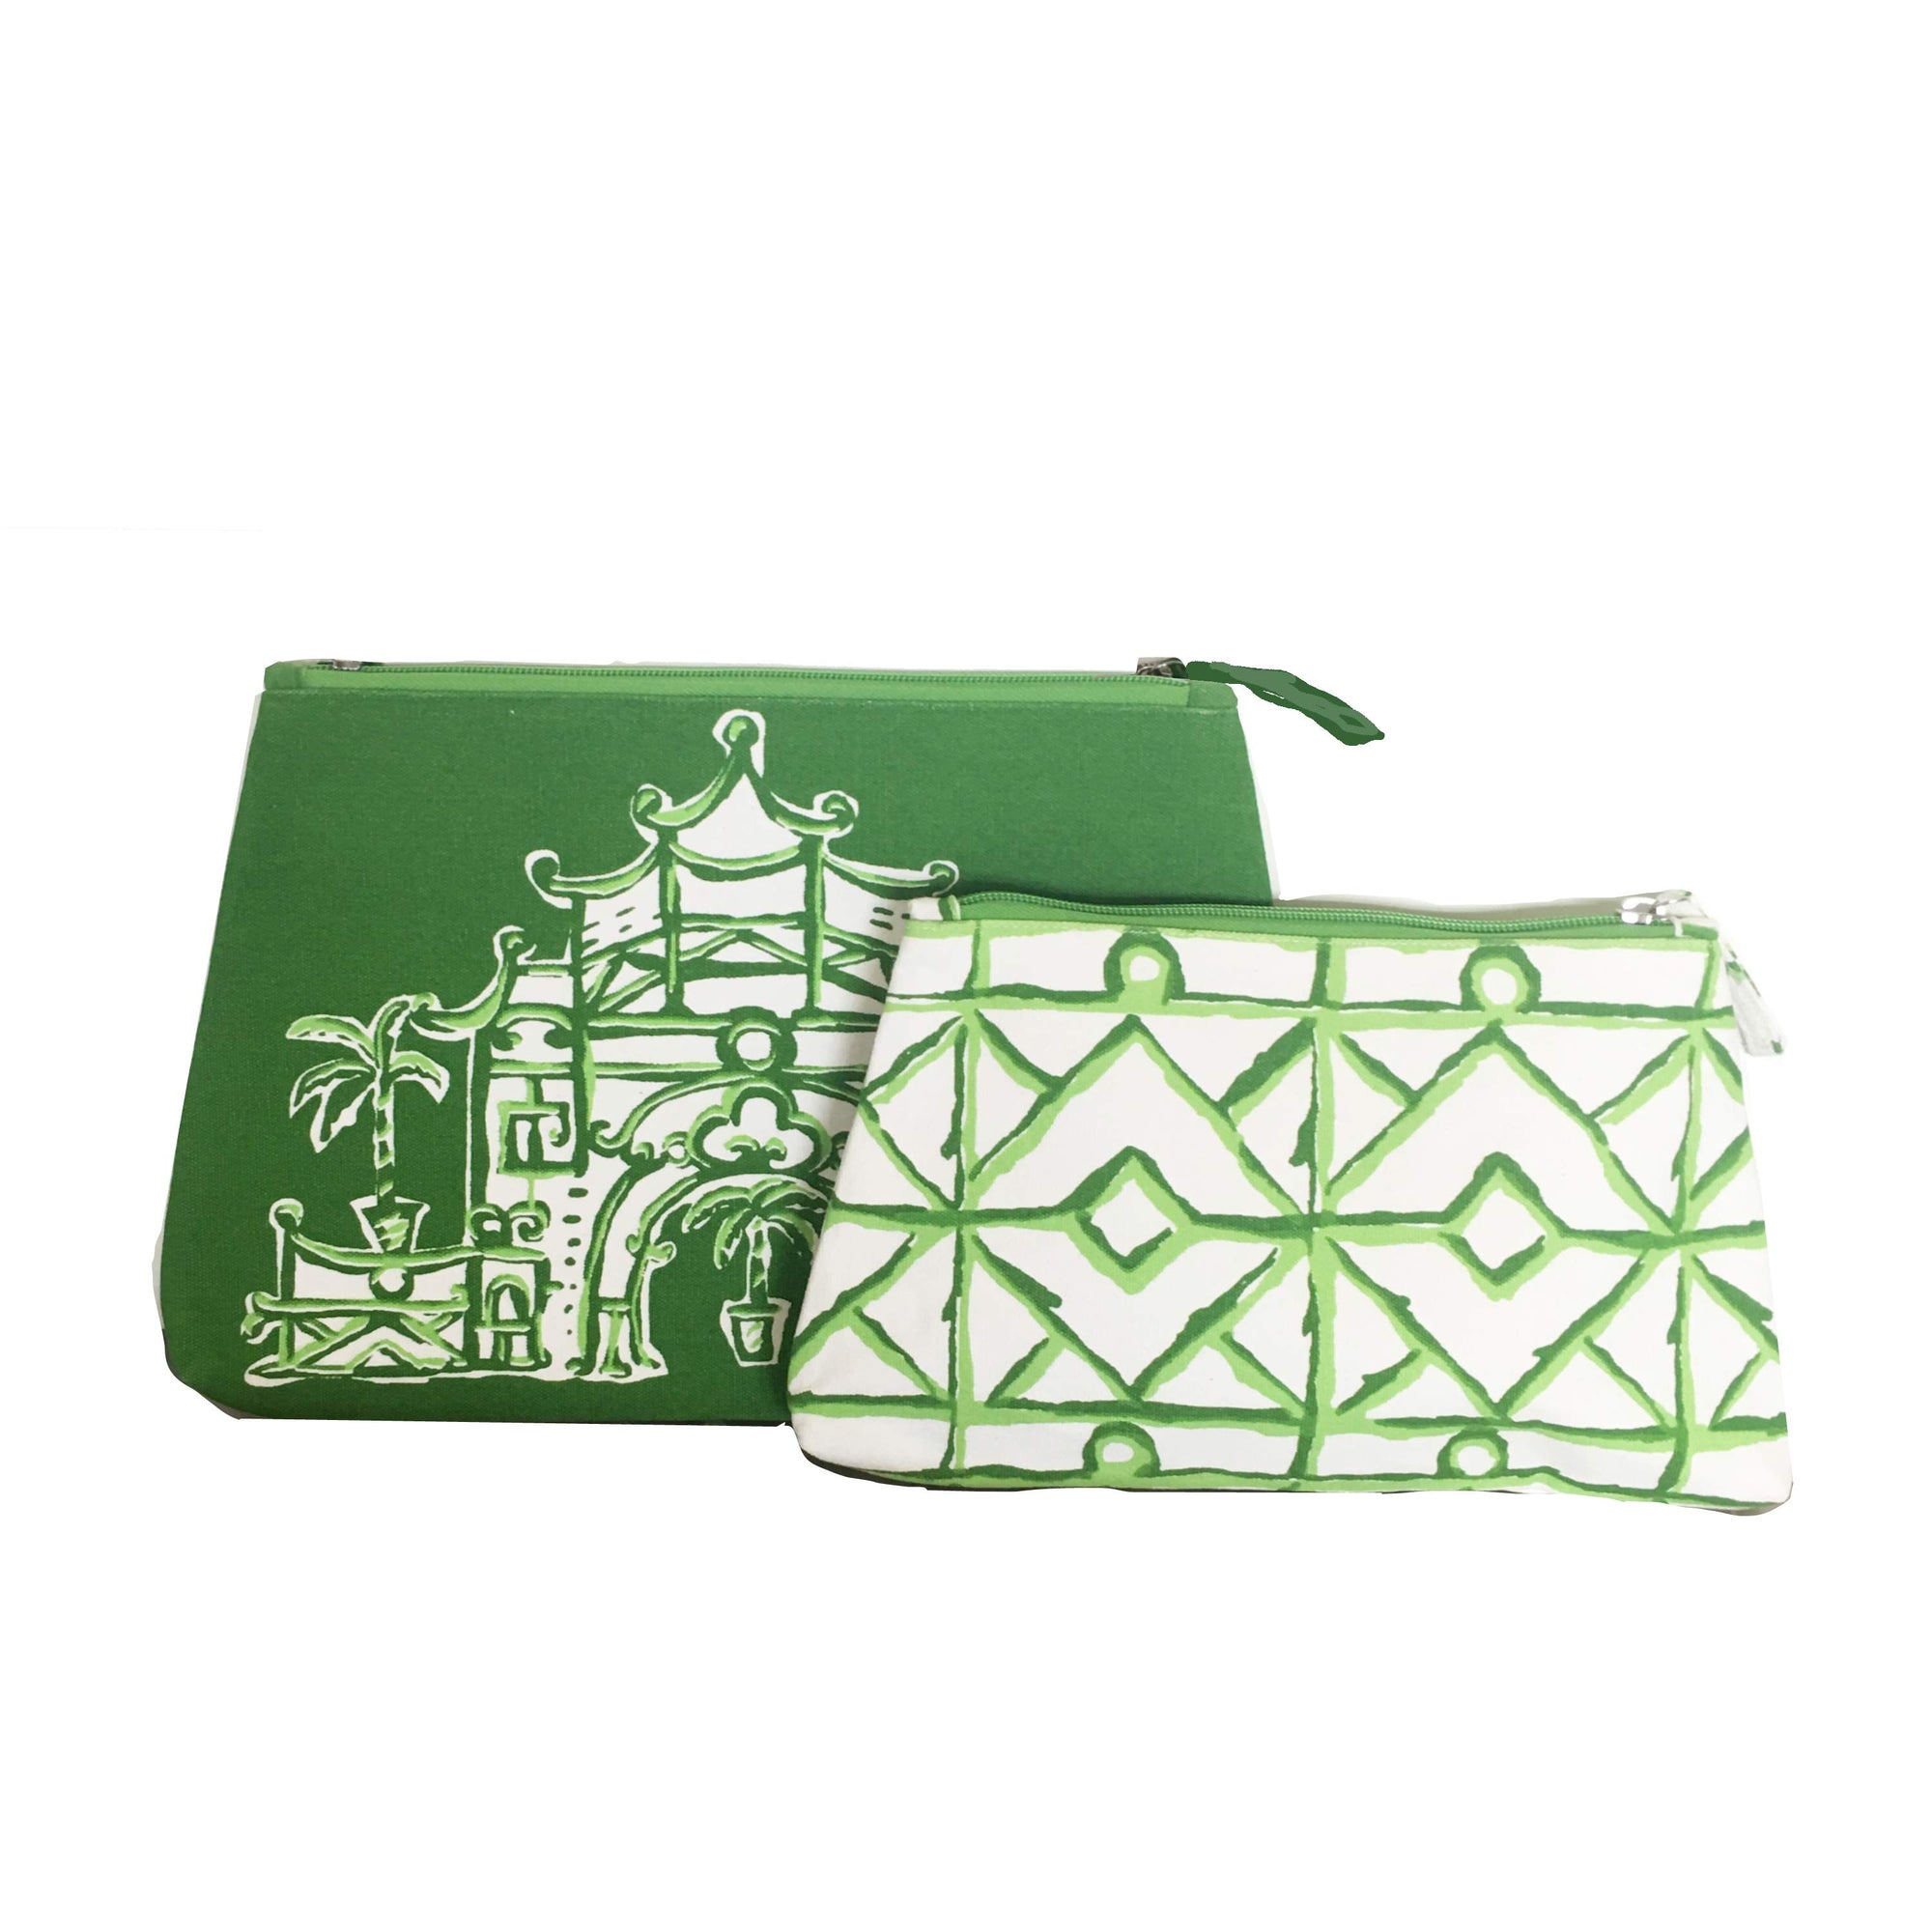 Silk Road Travel Bag in Green and Twiggy in Green